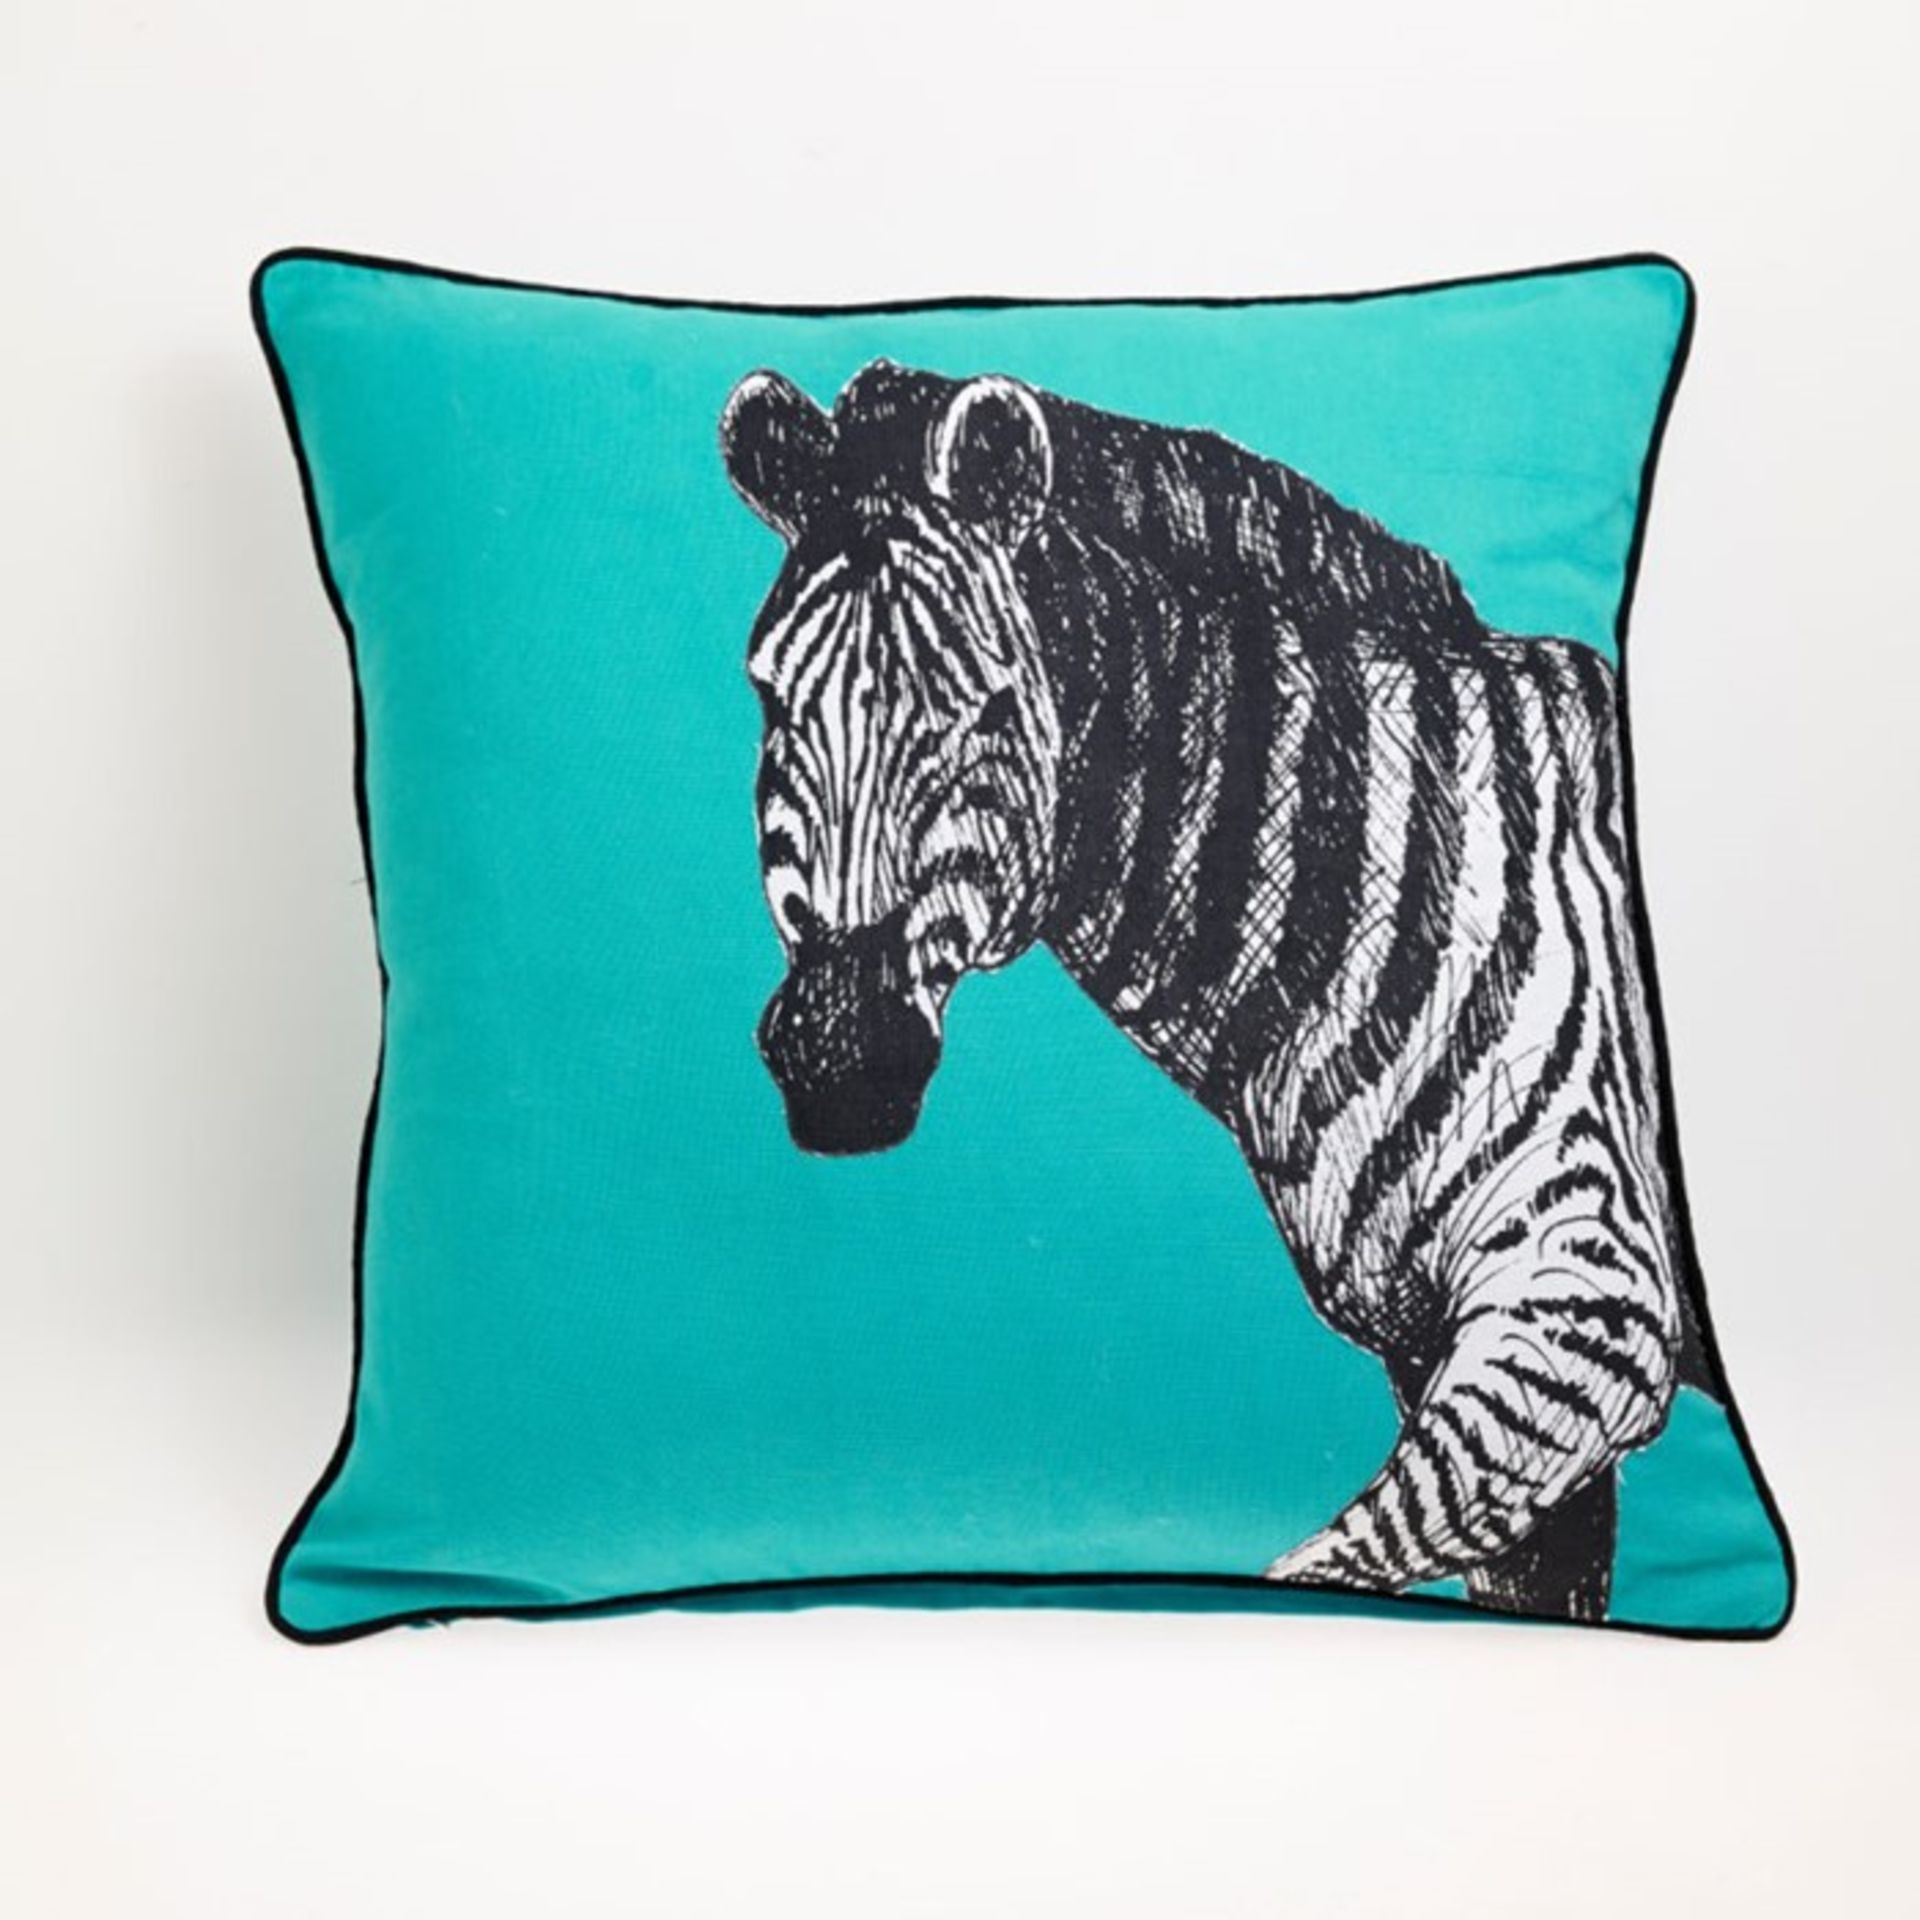 1 BRAND NEW PACKAGED ARTHOUSE ZEBRA TEAL CUSHION 300117 (VIEWING HIGHLY RECOMMENDED)